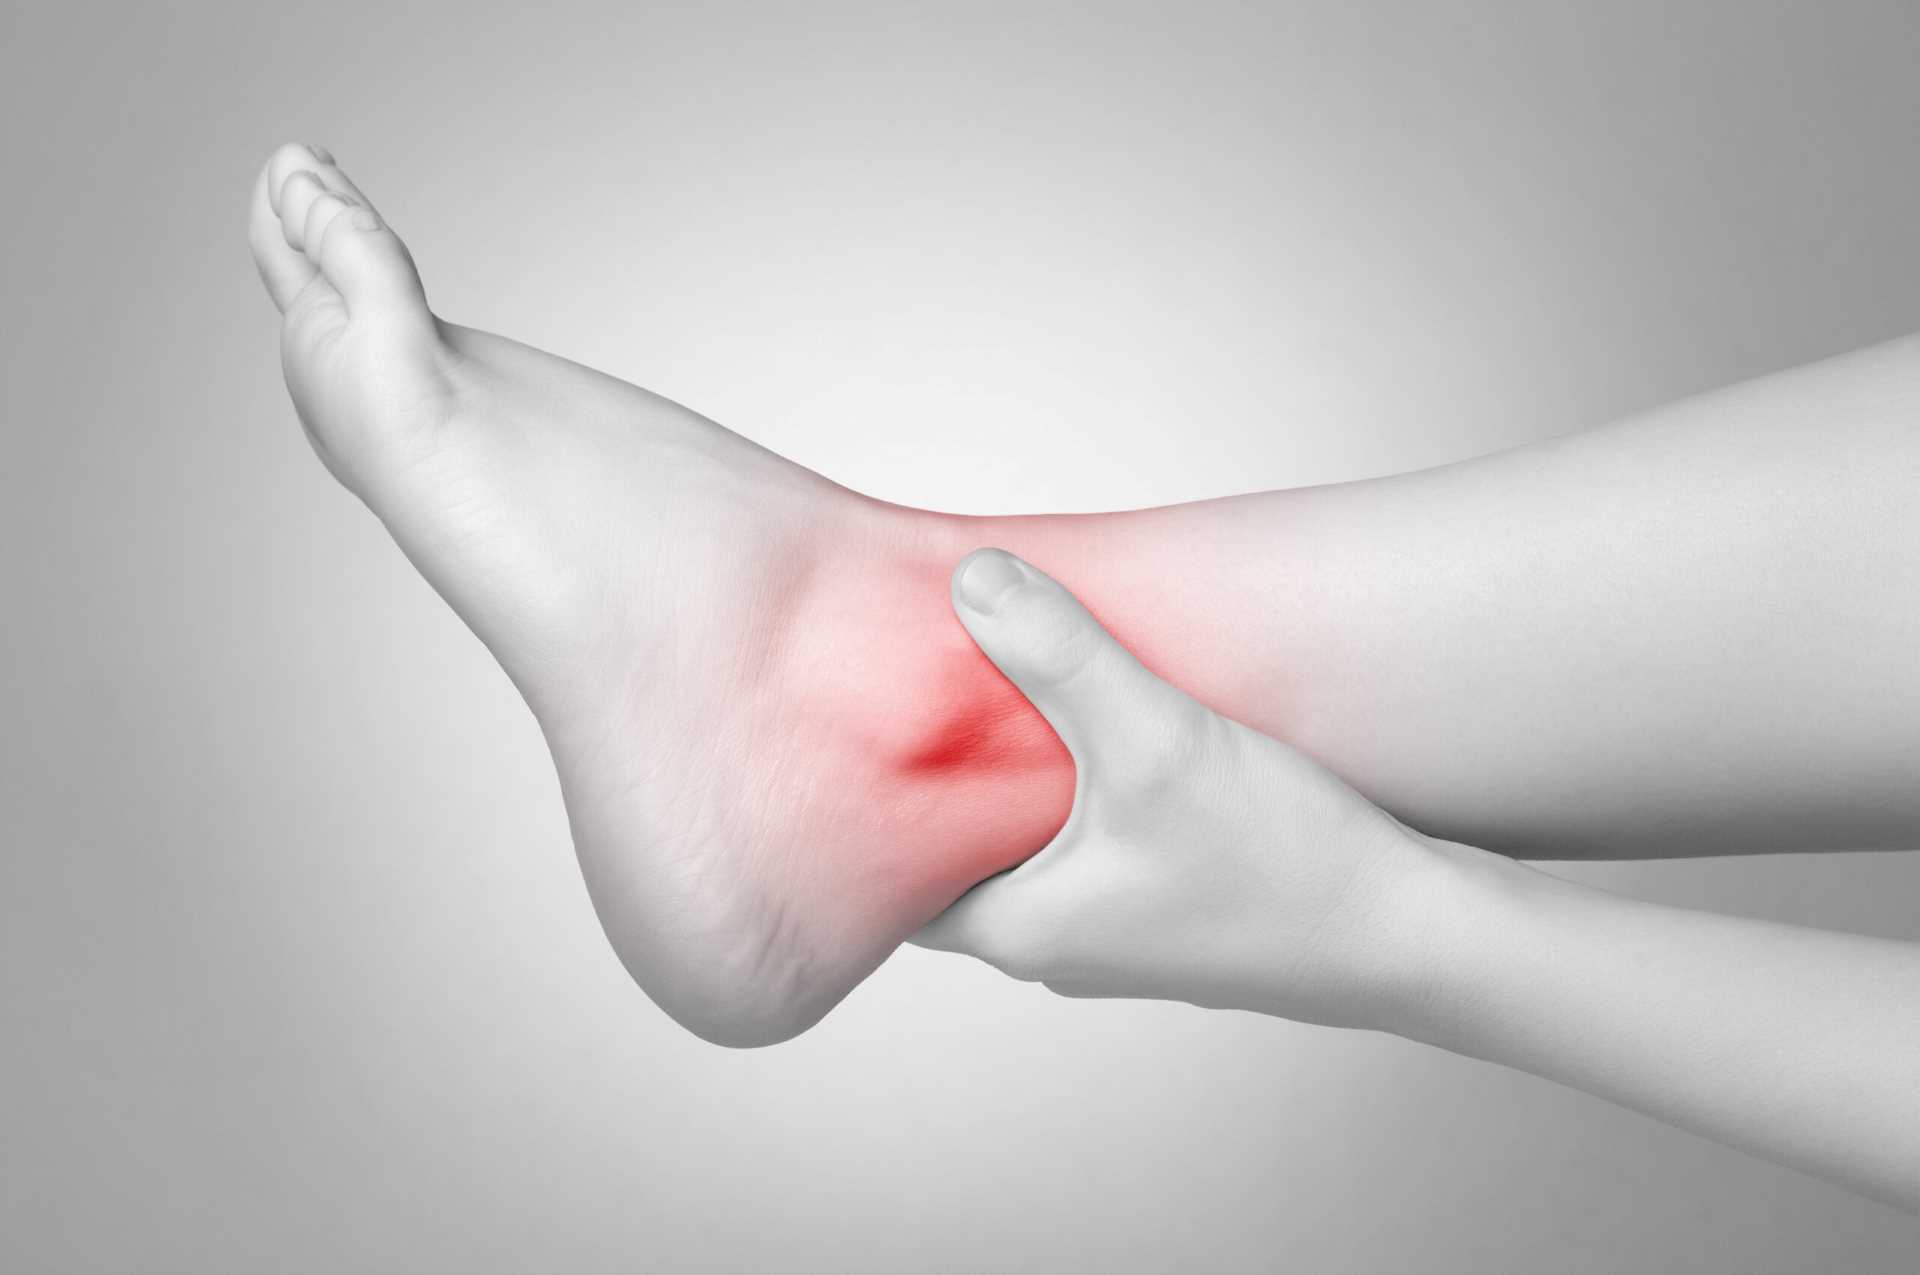 plantar fasciitis explained, home remedies and treatment